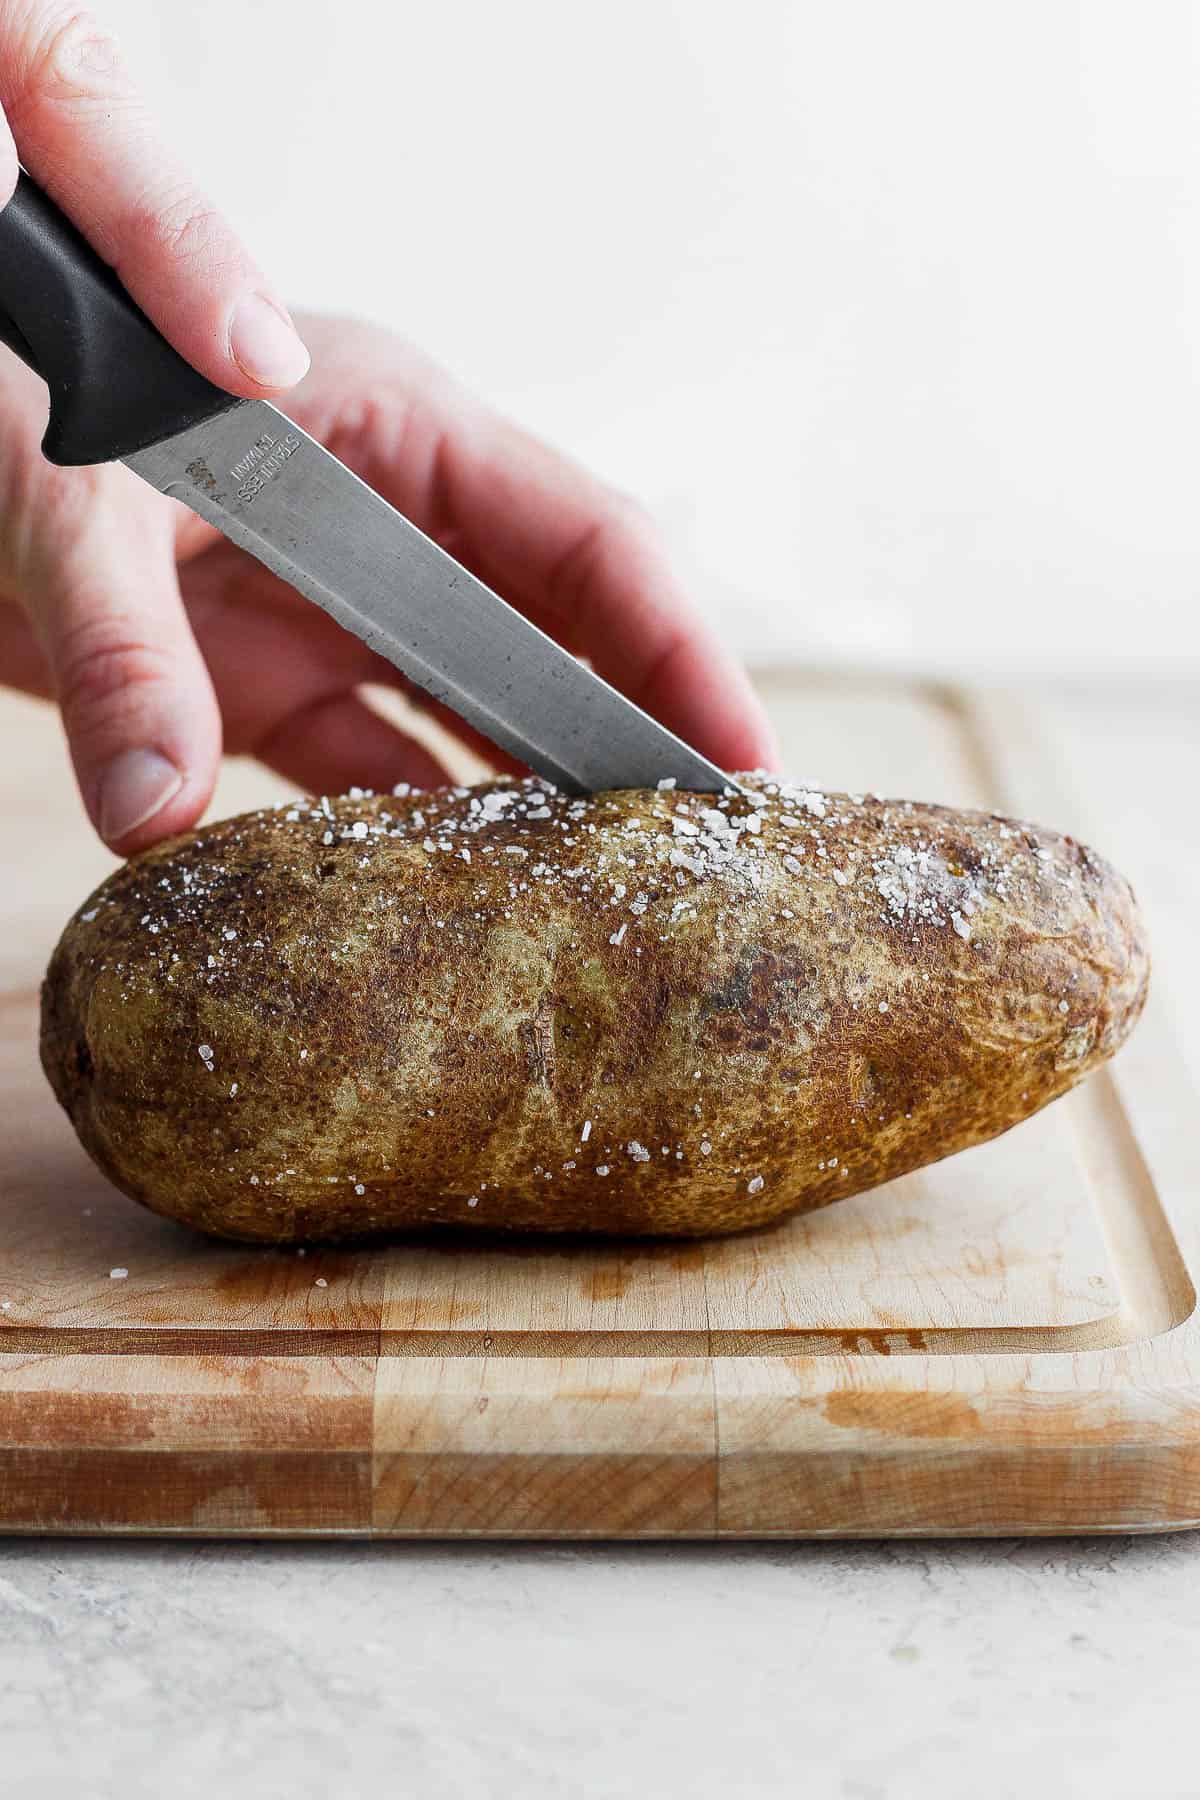 Slicing baked potato in half after baking